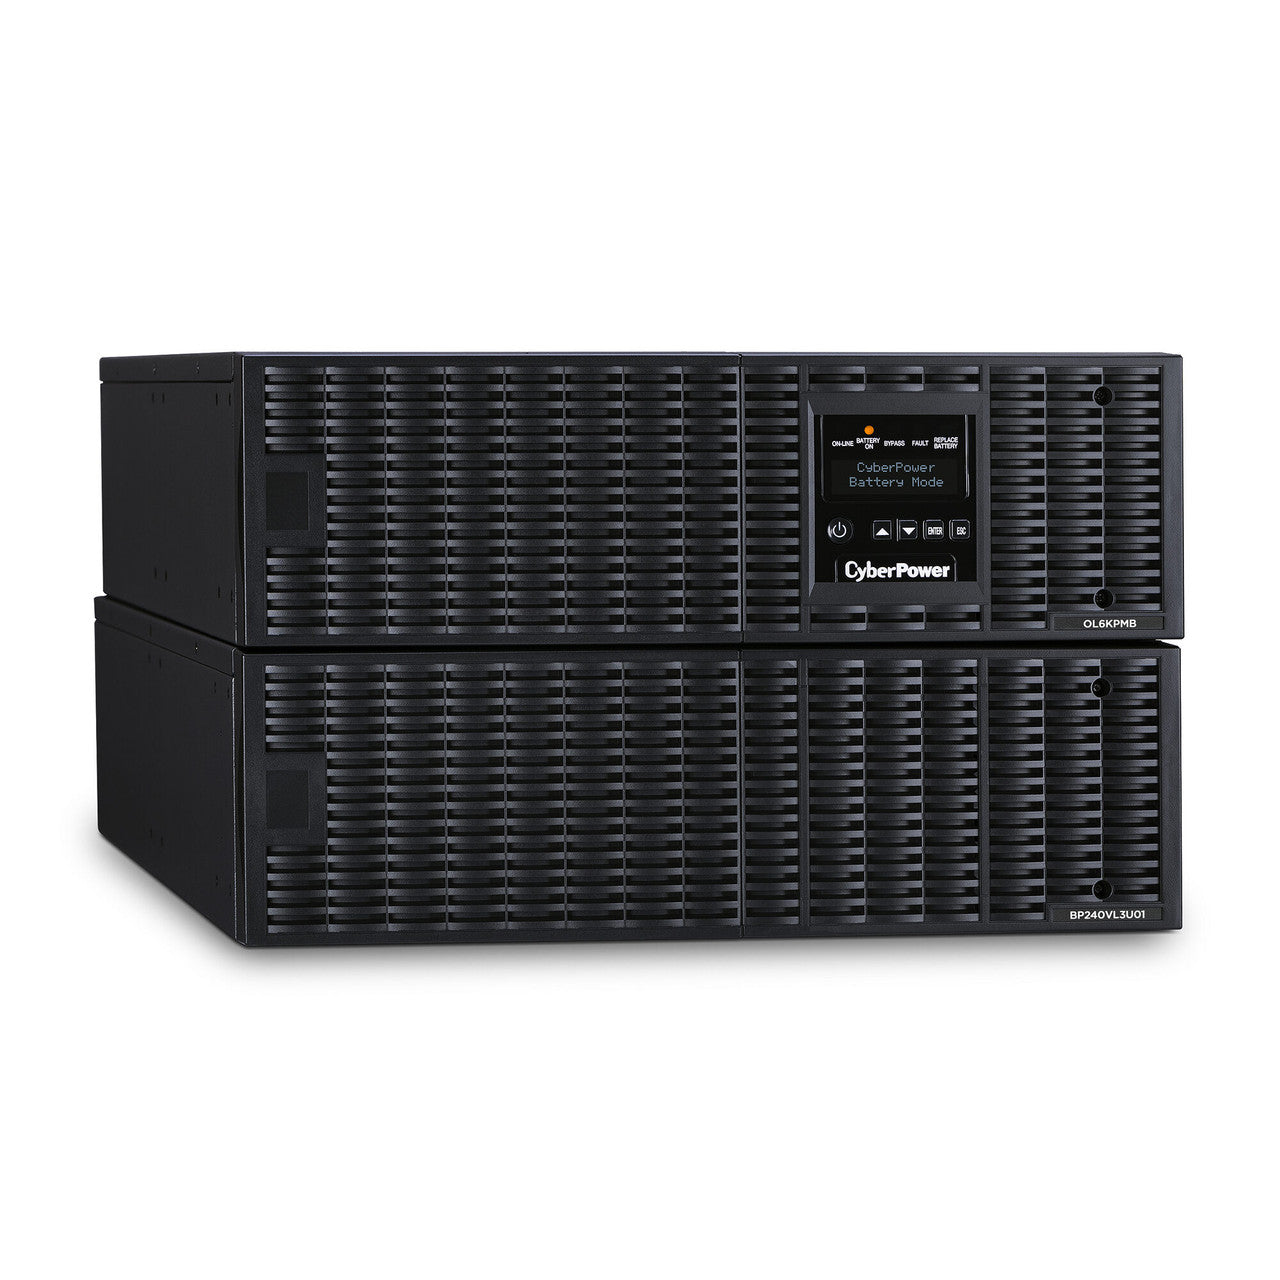 CyberPower OL6KRTHW 6KVA/6KW, online double-conversion UPS, PF=1, 6U rack/tower convertible